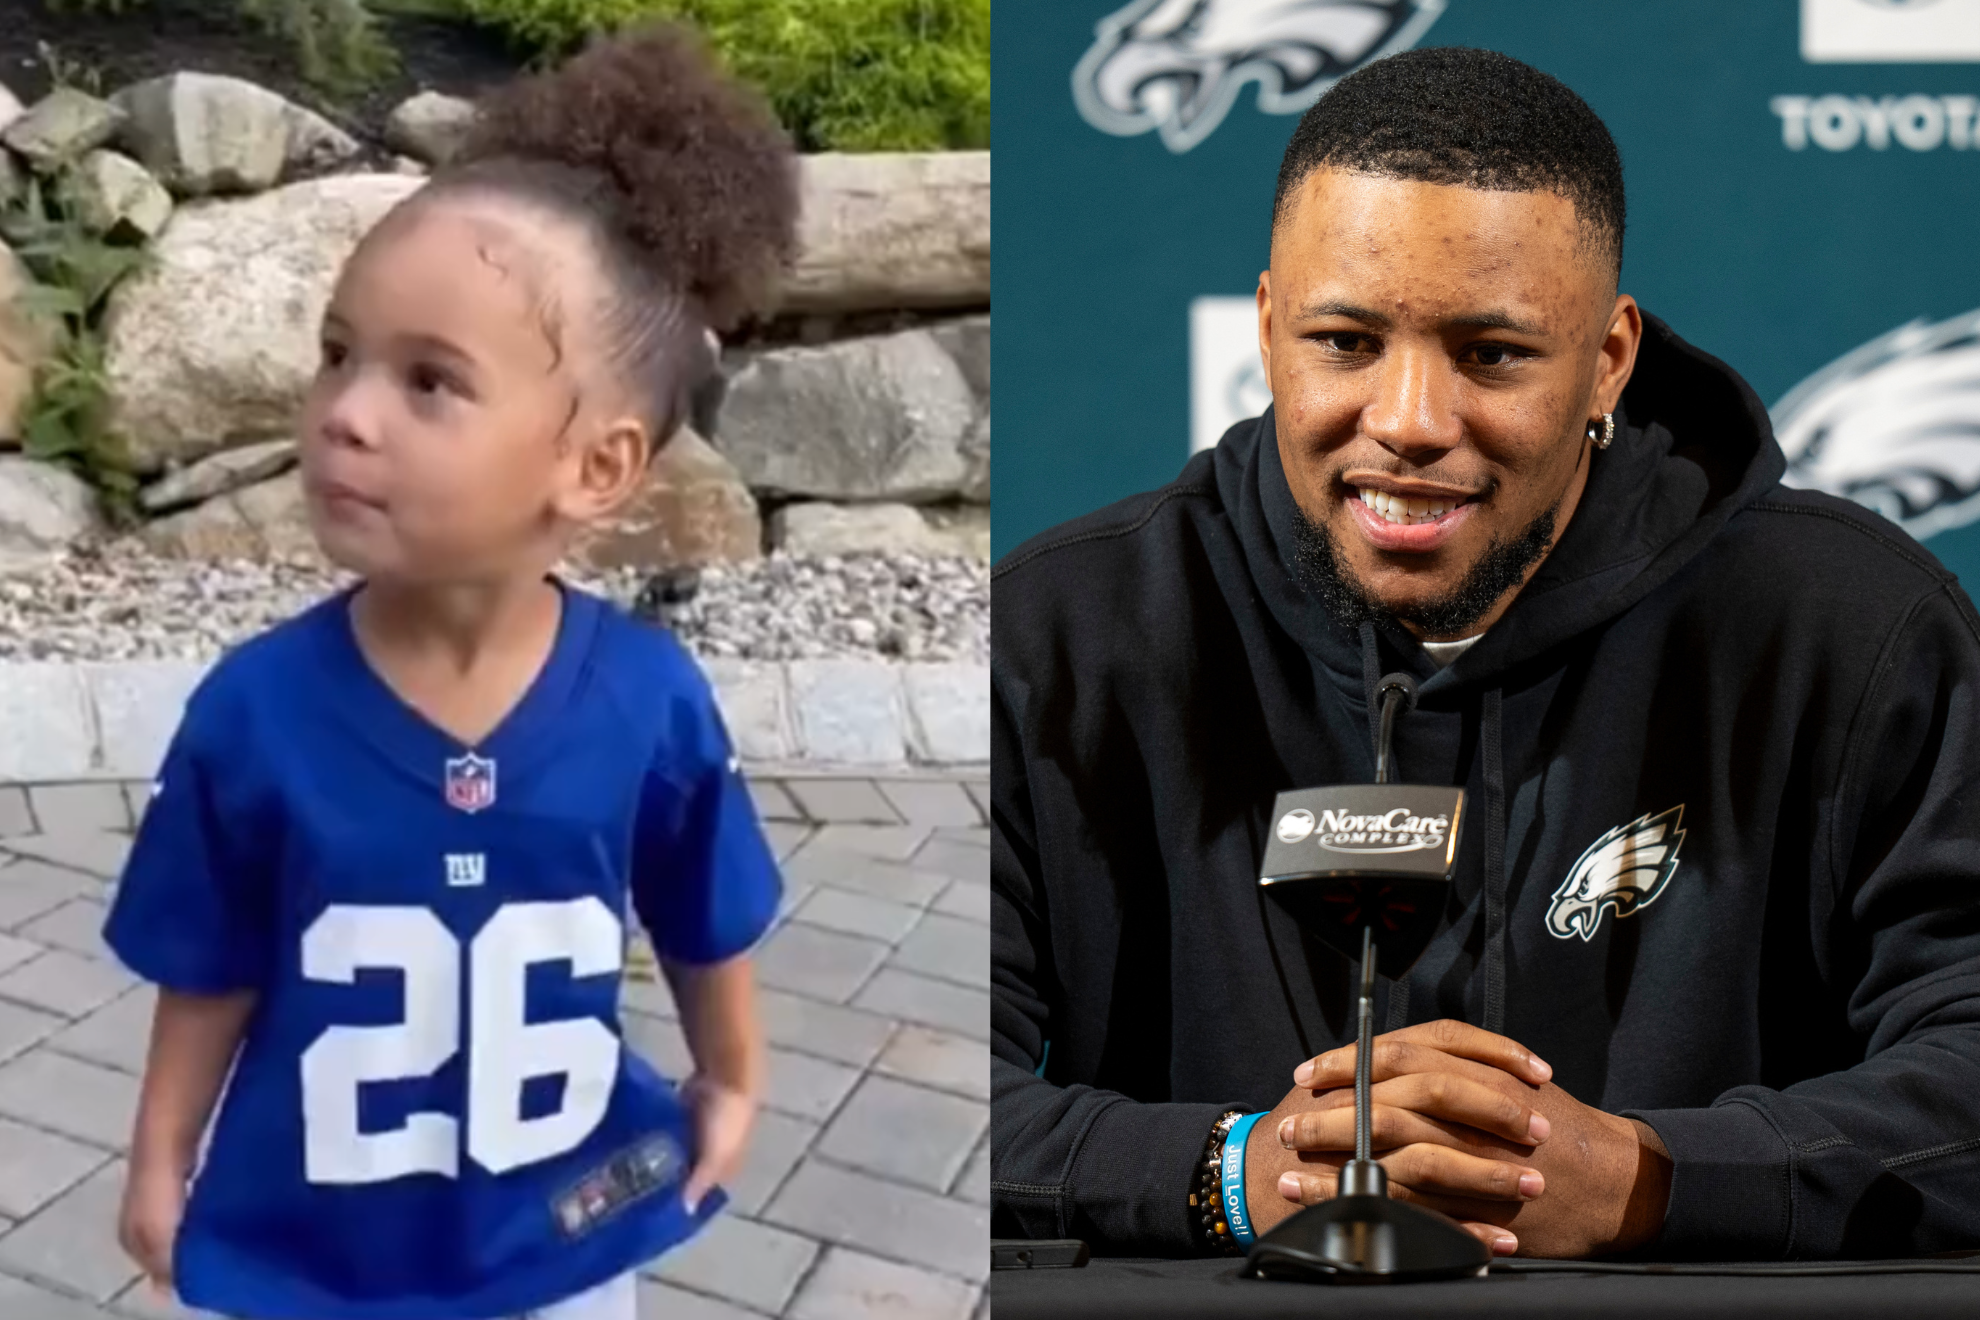 Saquon Barkley and his daughter.